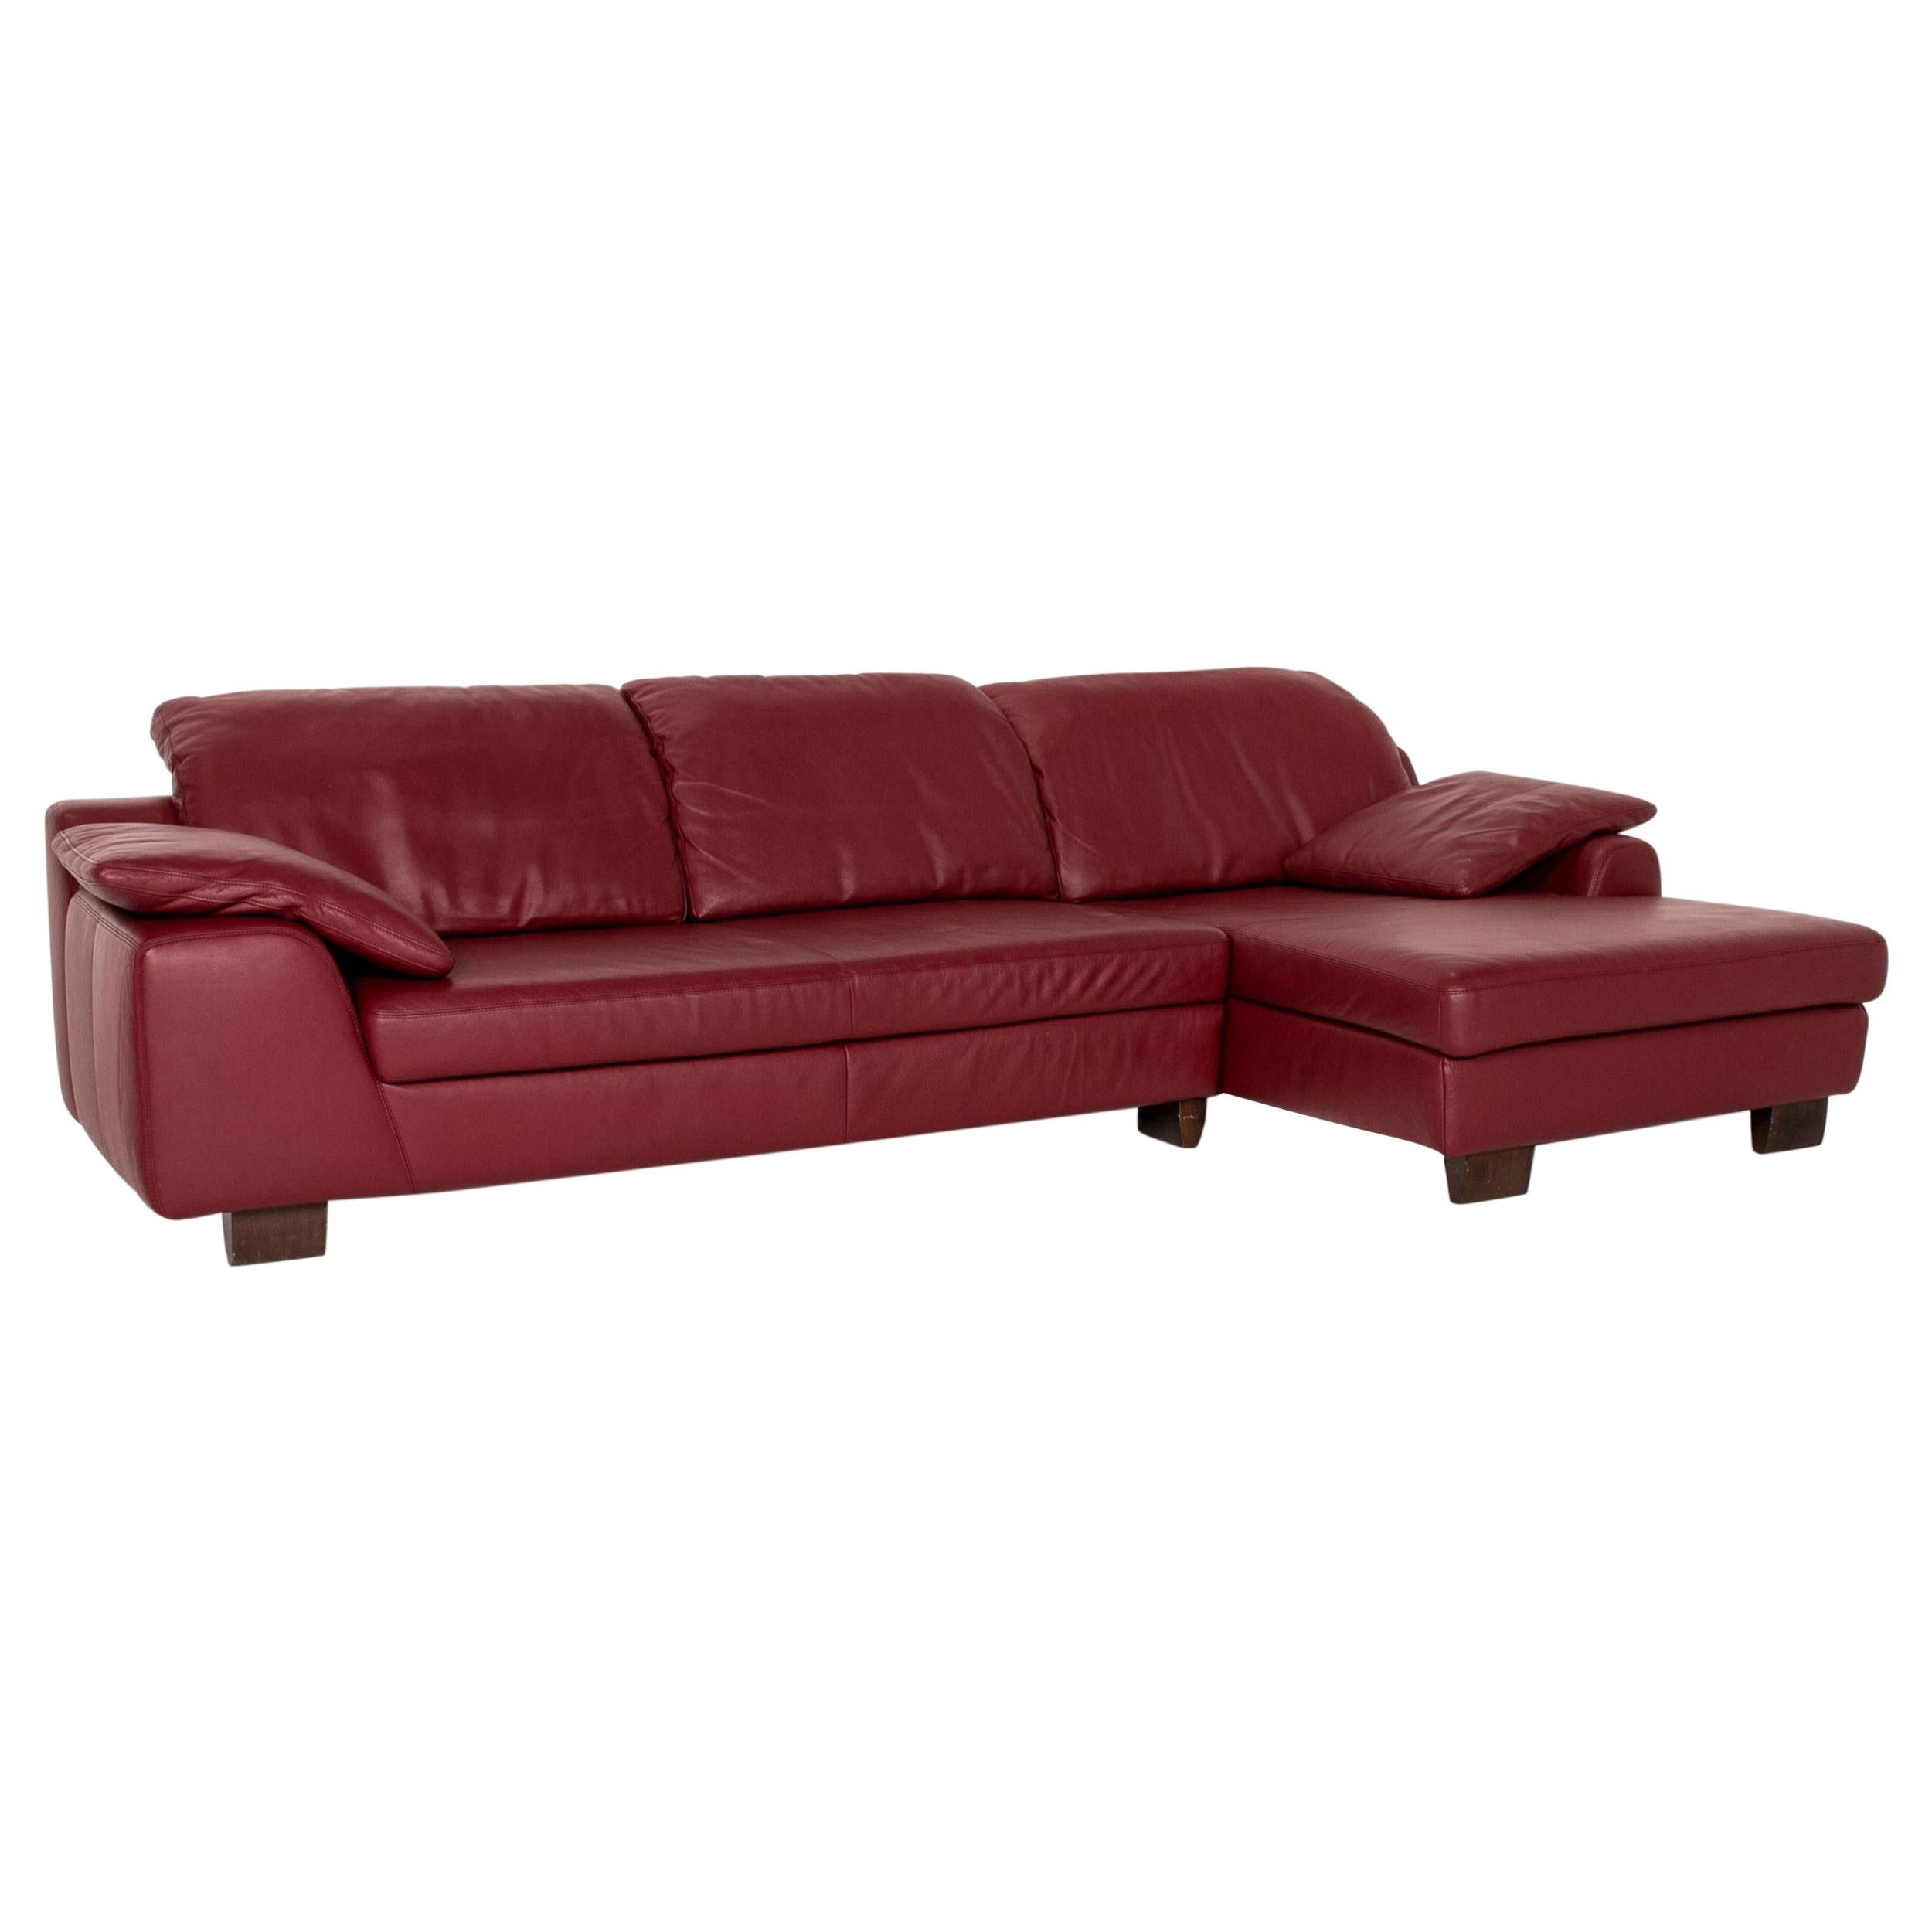 Musterring Leather Corner Sofa Red Dark Red Sofa Couch For Sale